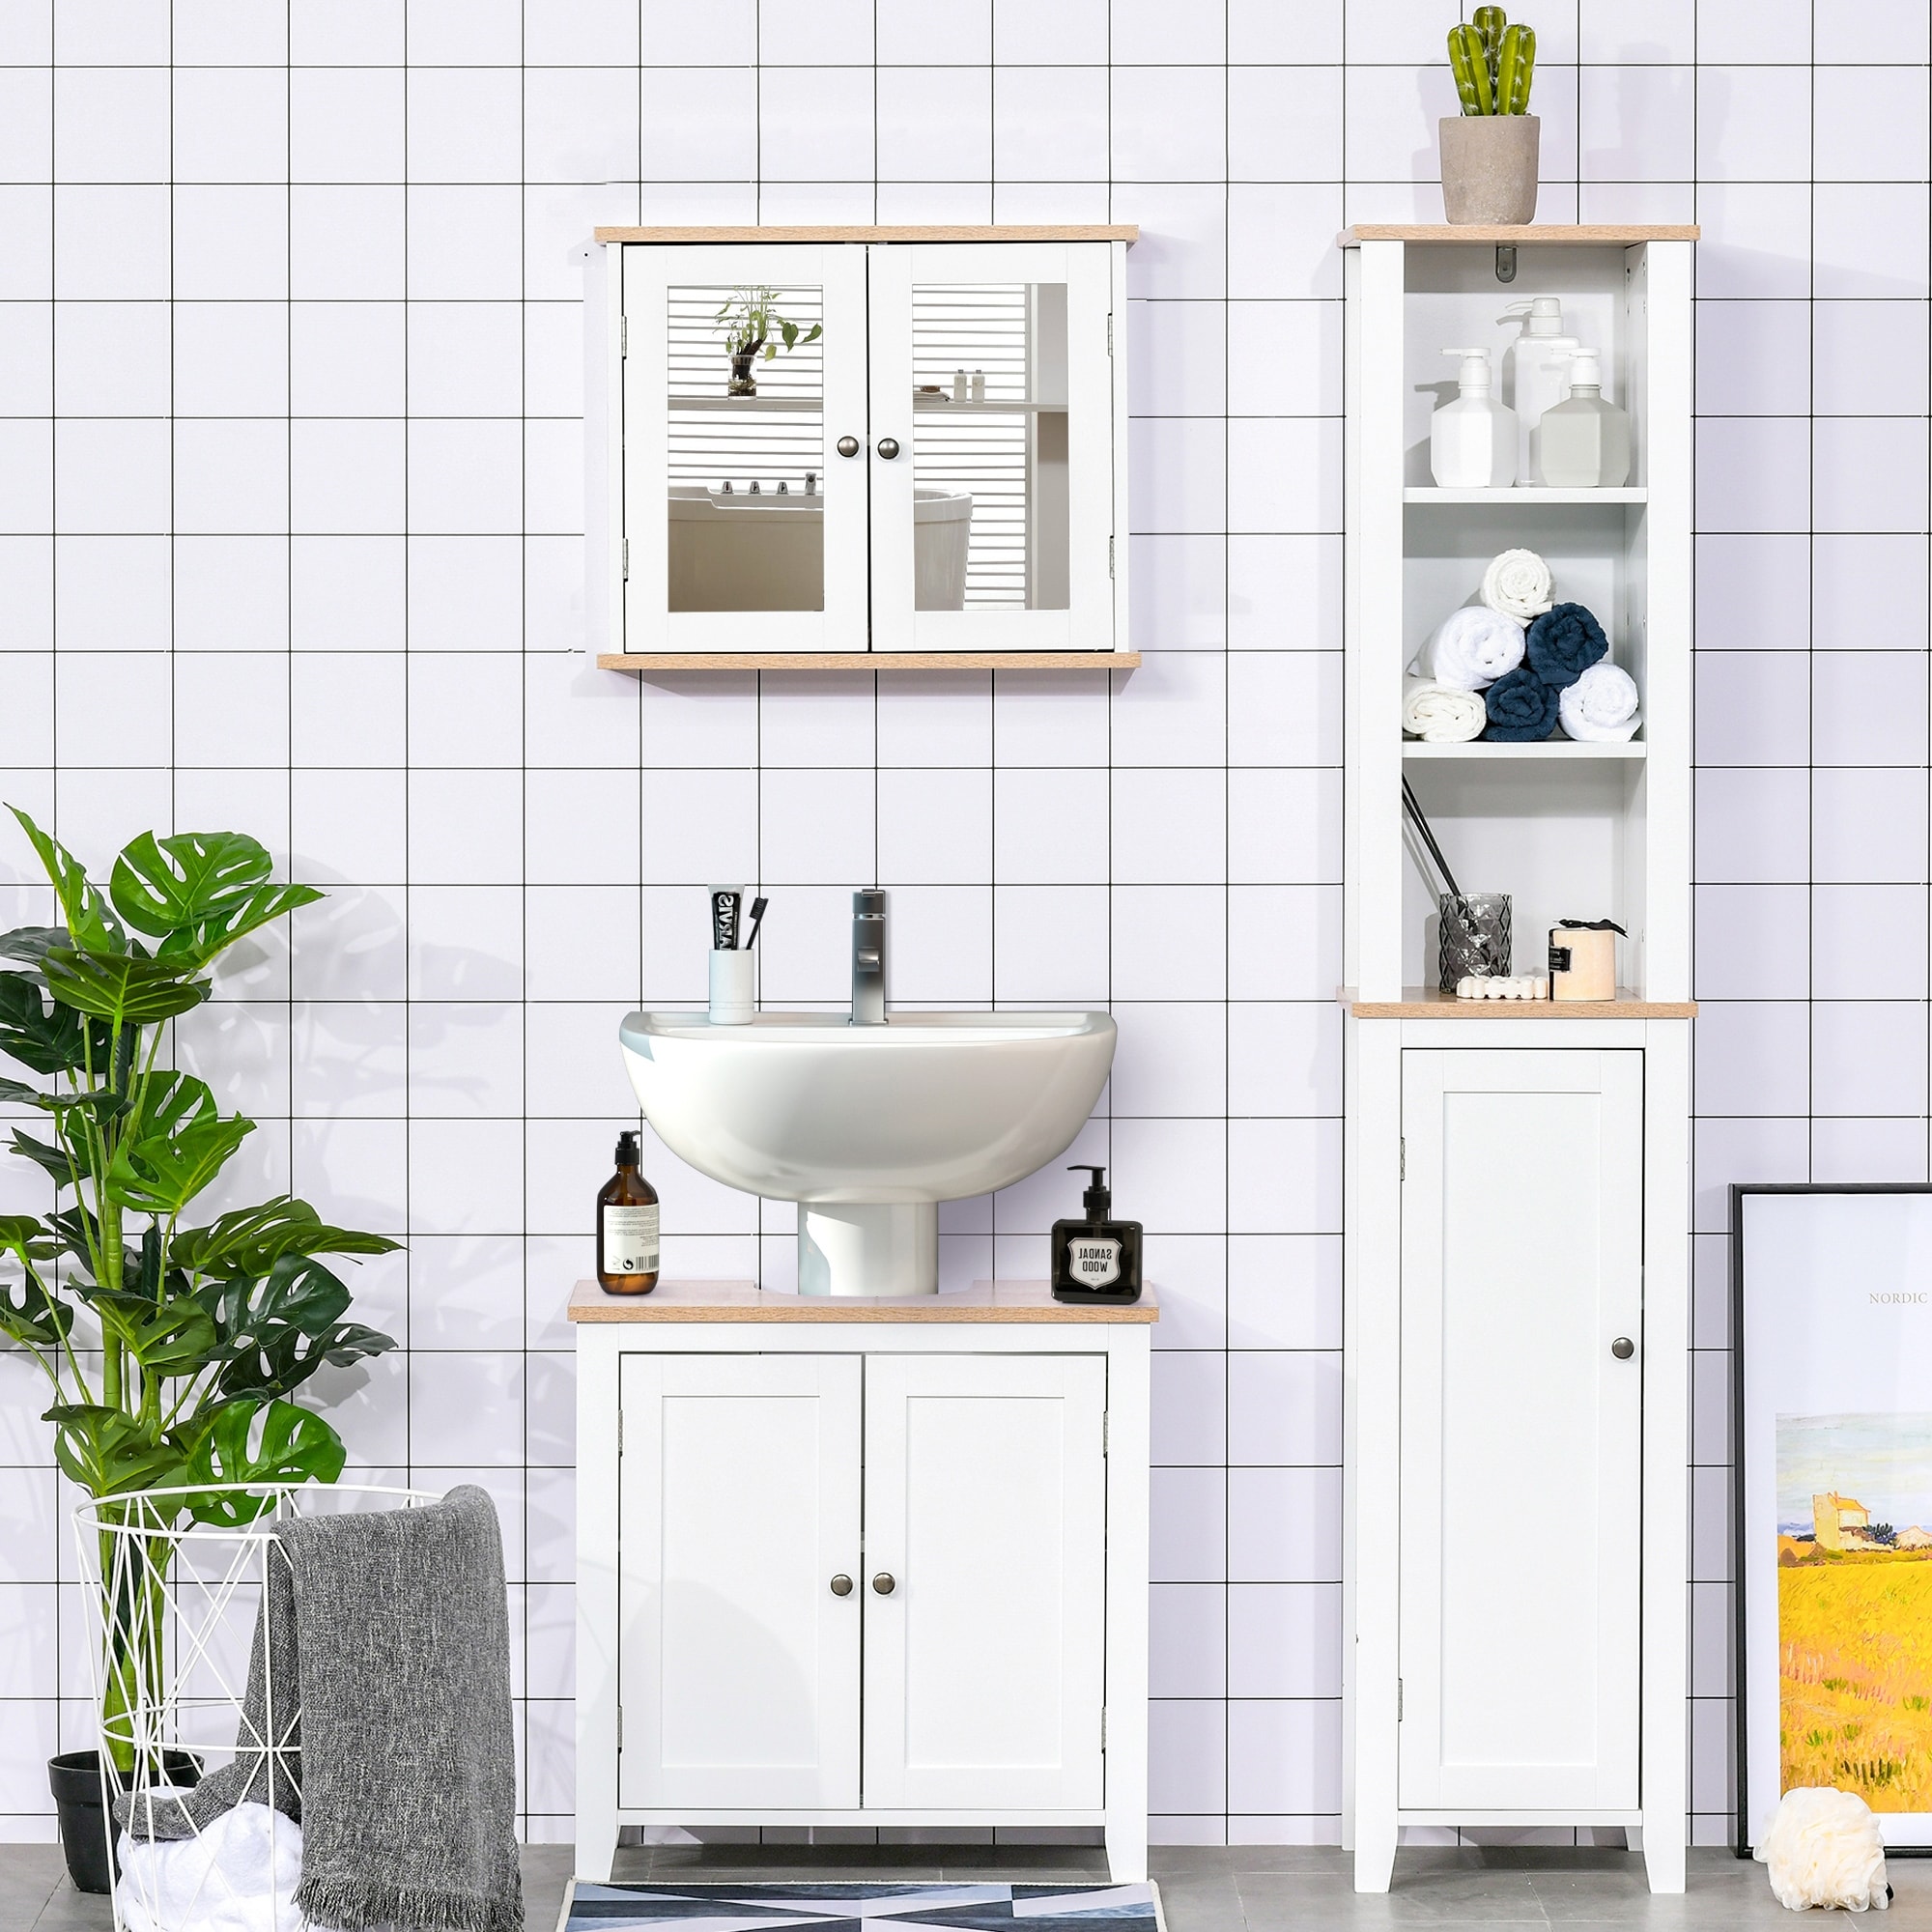 https://ak1.ostkcdn.com/images/products/is/images/direct/6c099c551e4c17dcc3b4bf068488a3aed76b8e60/Kleankin-Under-Sink-Bathroom-Sink-Cabinet%2C-Storage-Unit-with-U-Shape-and-Adjustable-Internal-Shelf%2C-White.jpg